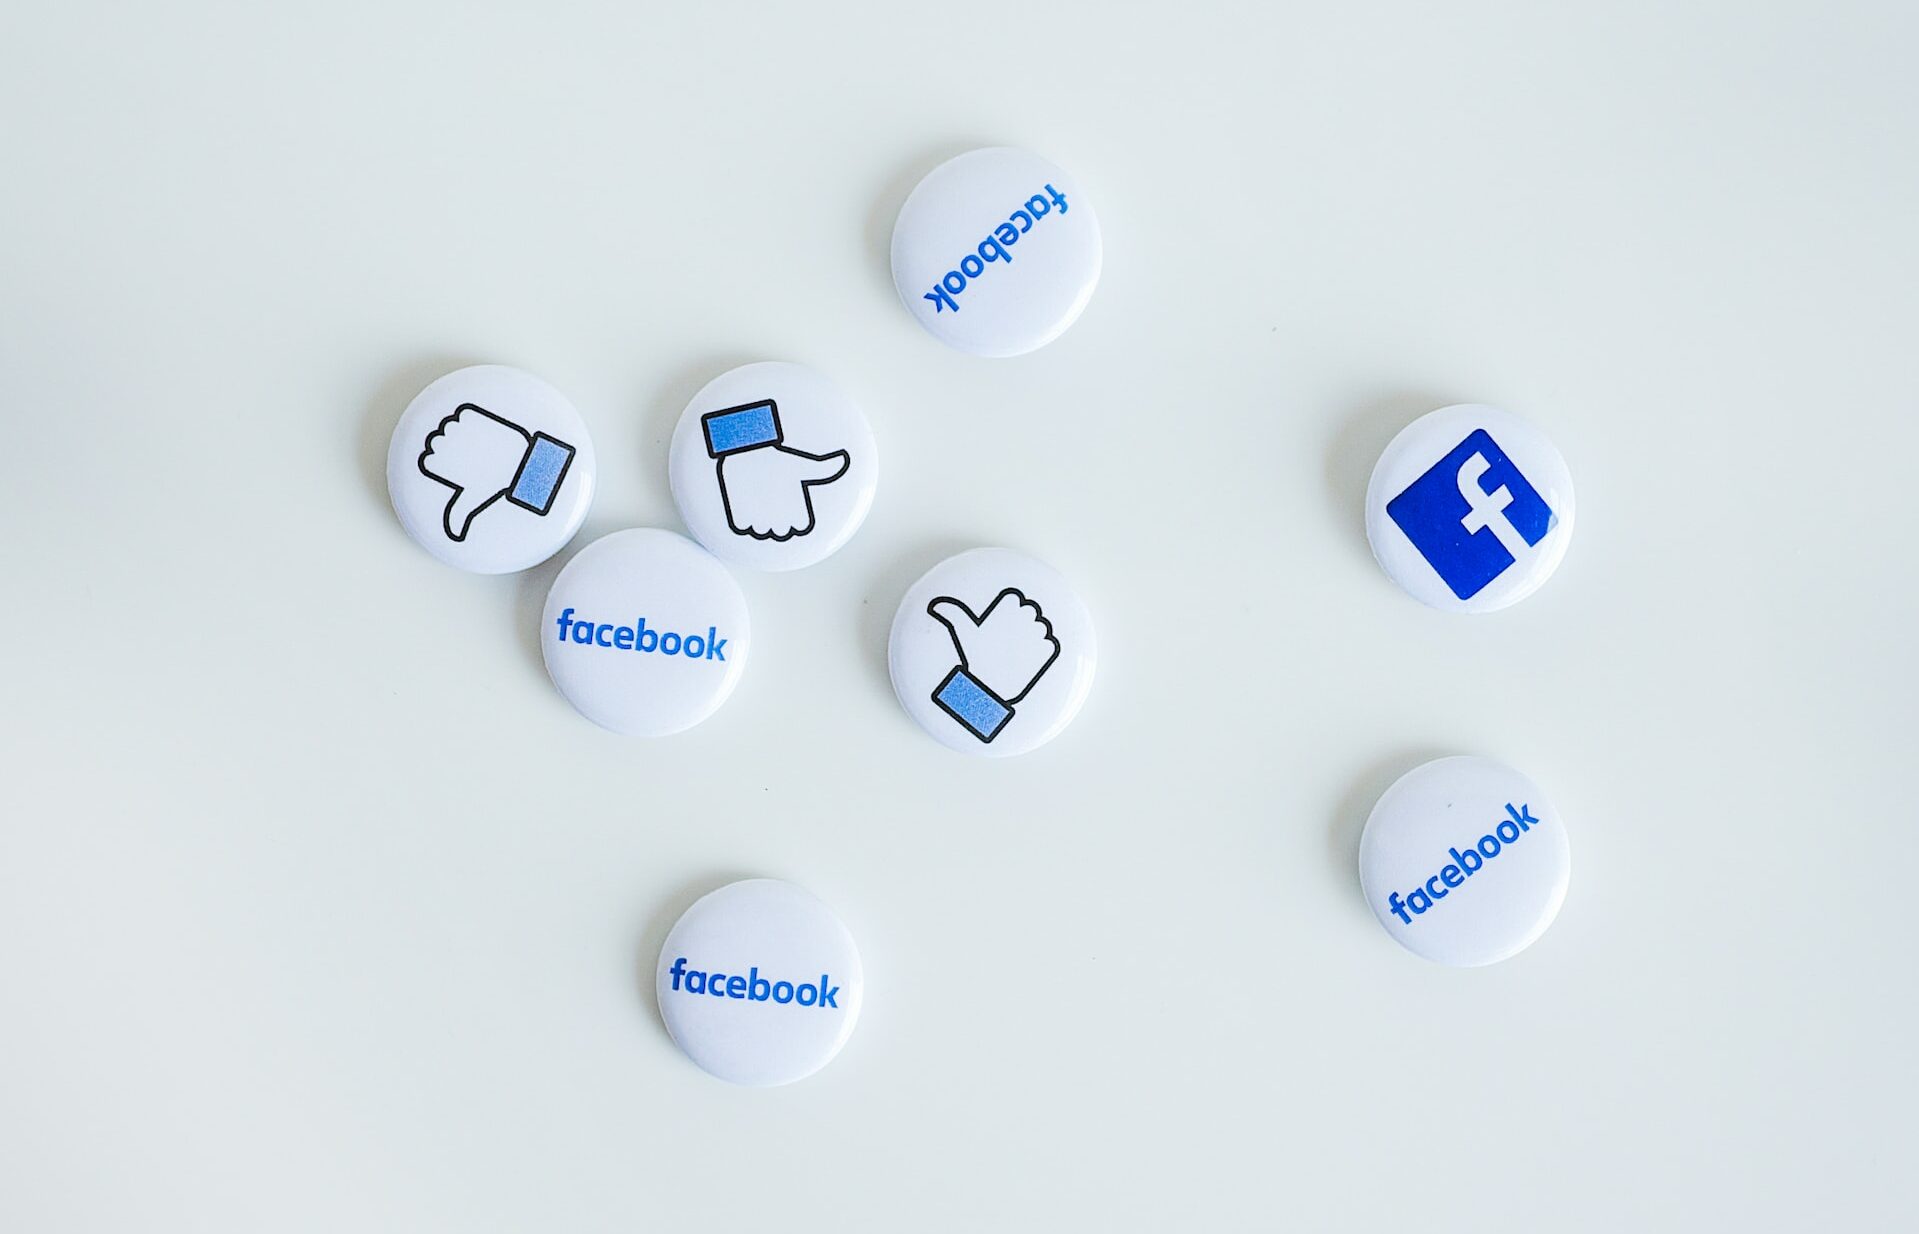 facebook marketing for dentists - pins of facebook logo and like button